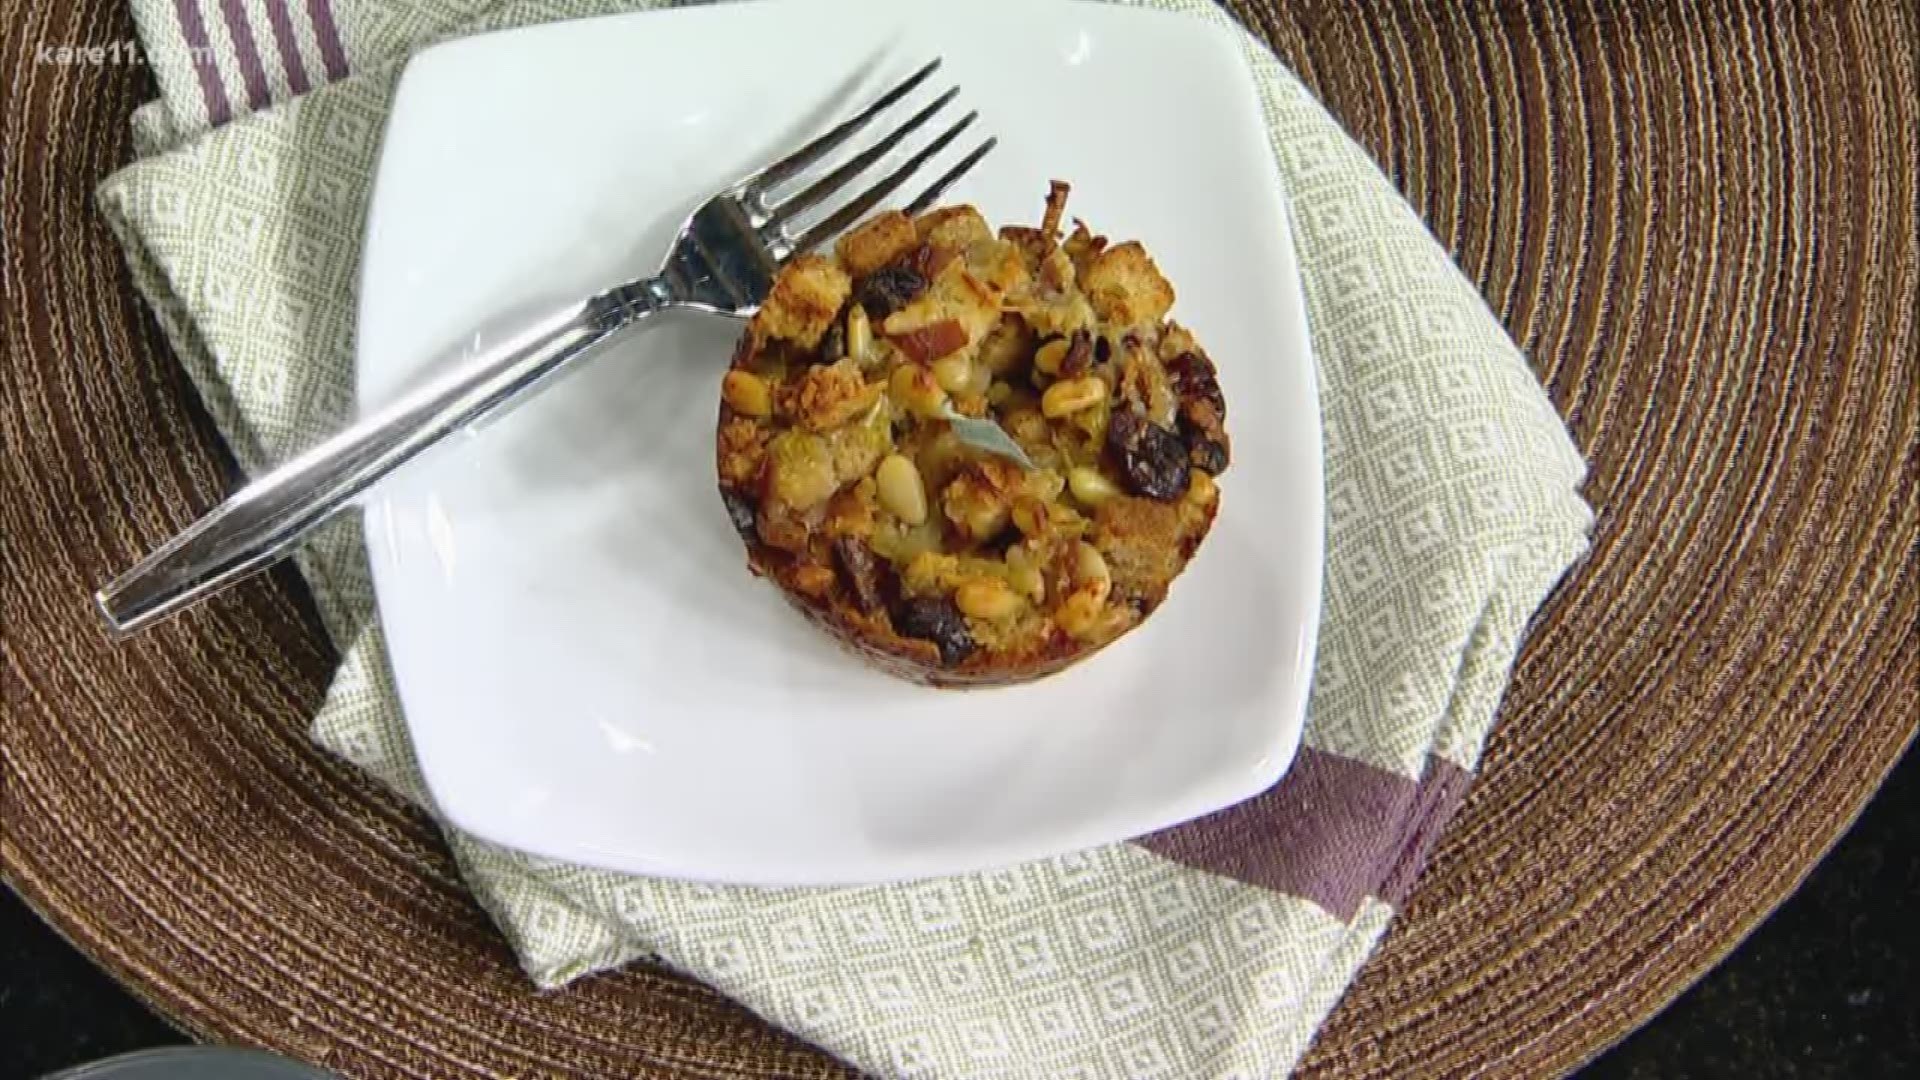 A fun alternative to this Thanksgiving  tradition. See Belinda make one of her favorite dishes, stuffin' muffins, with a little help from Kowalski's. Follow along with the recipe: https://www.kare11.com/article/news/italian-stuffin-muffins-recipe/89-61539